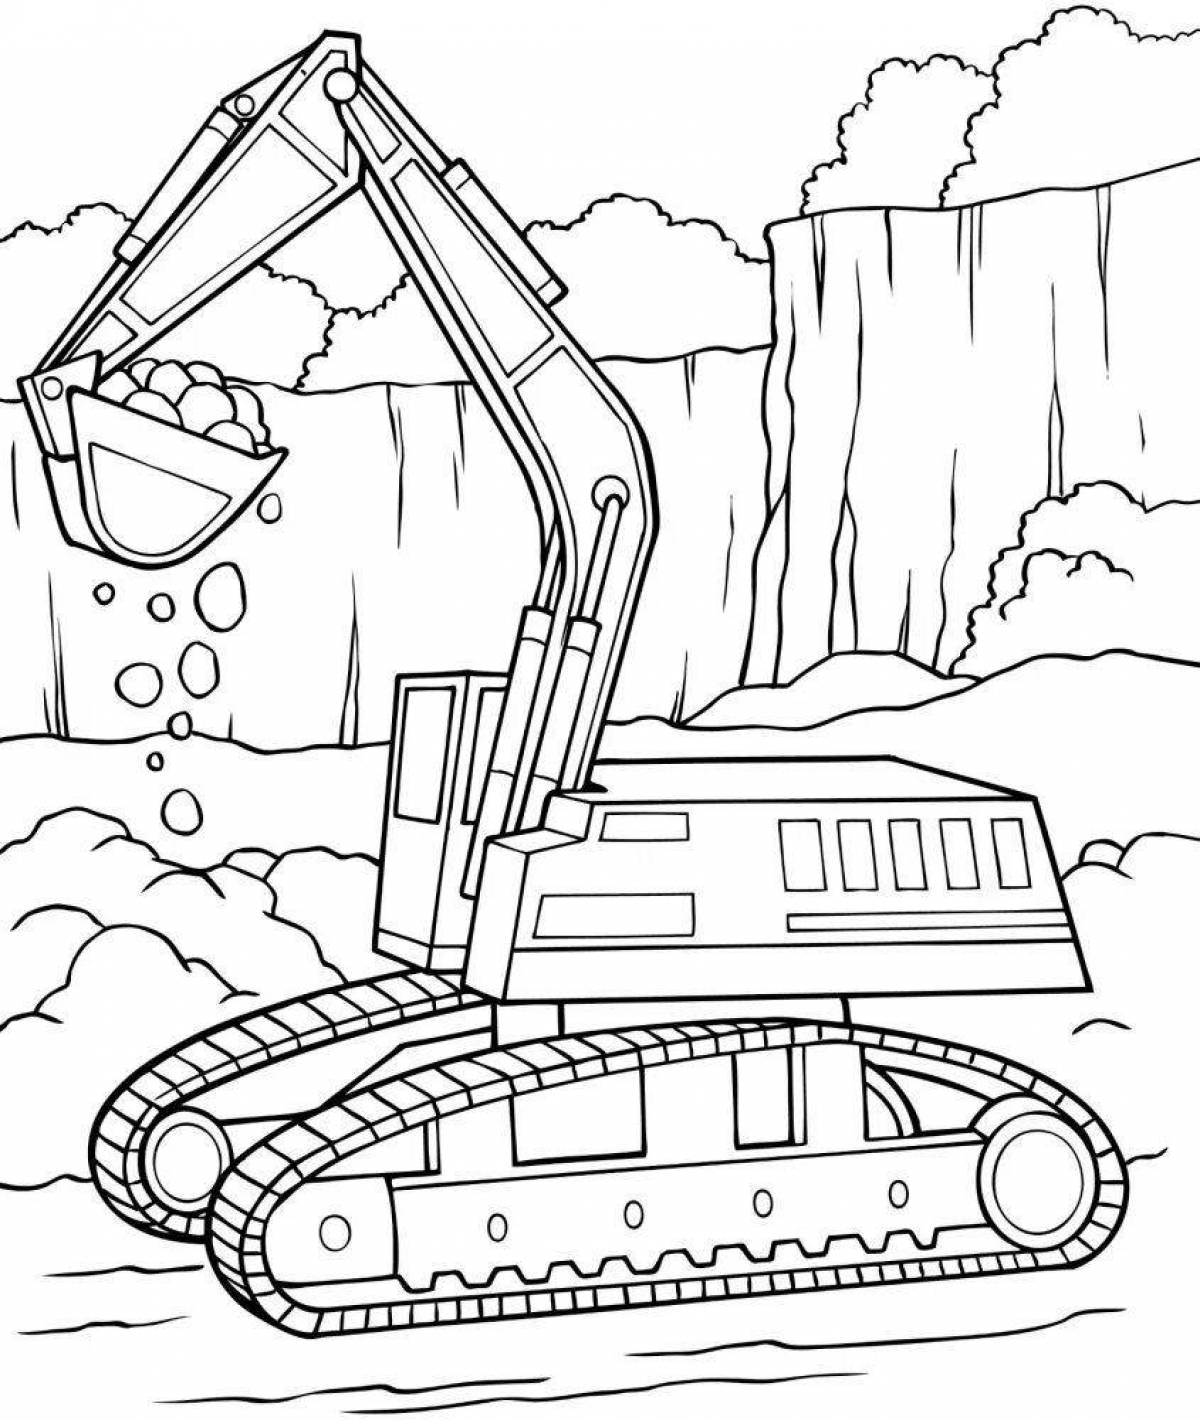 A fun excavator coloring book for kids